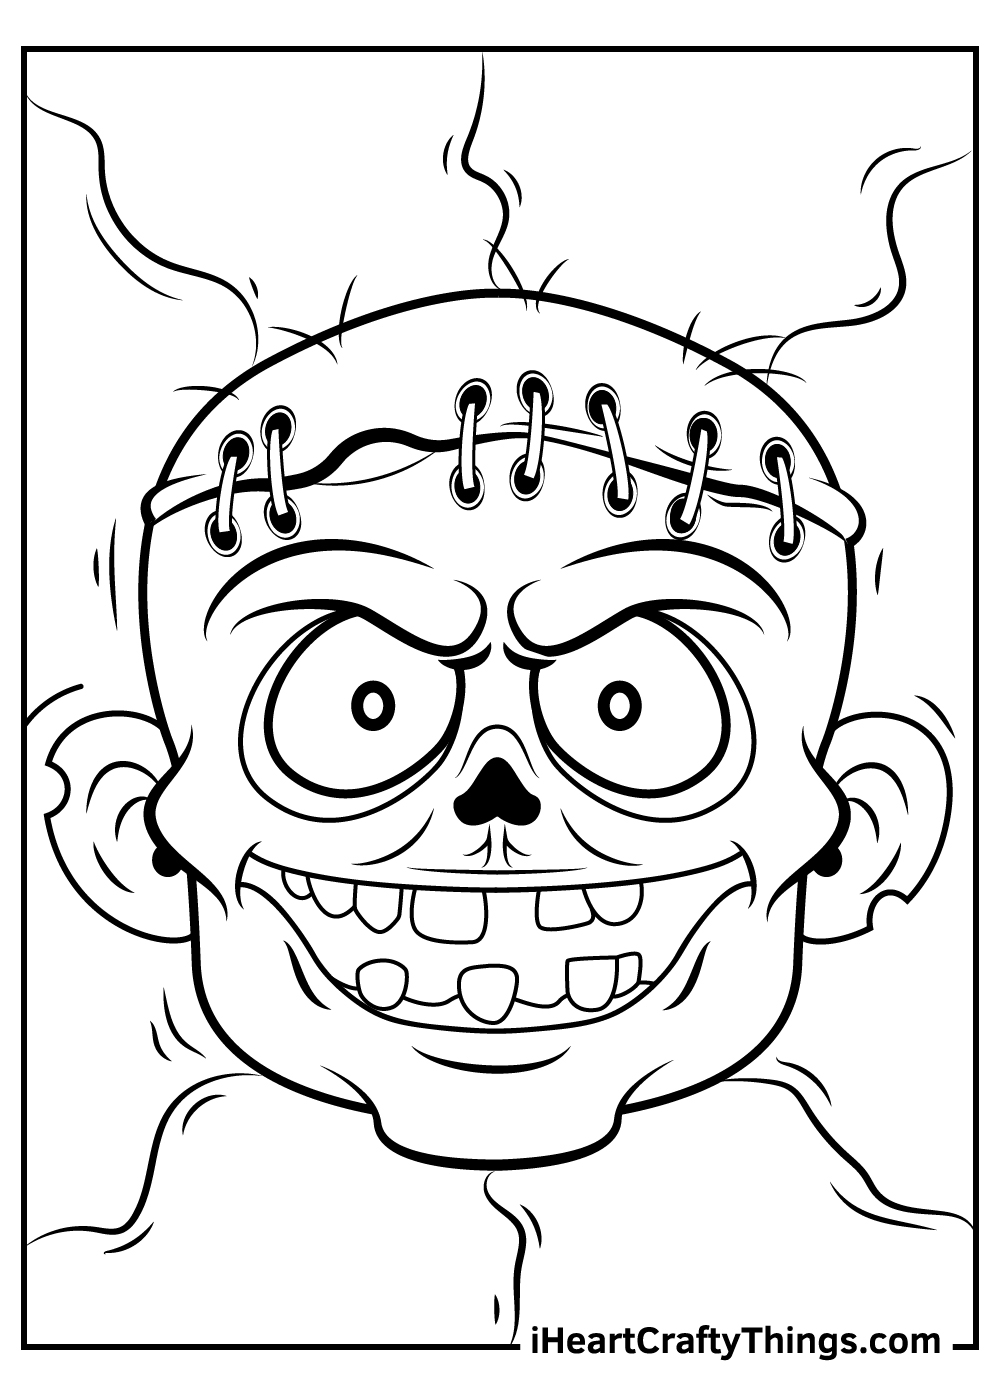 Printable Zombie Coloring Pages Updated 20